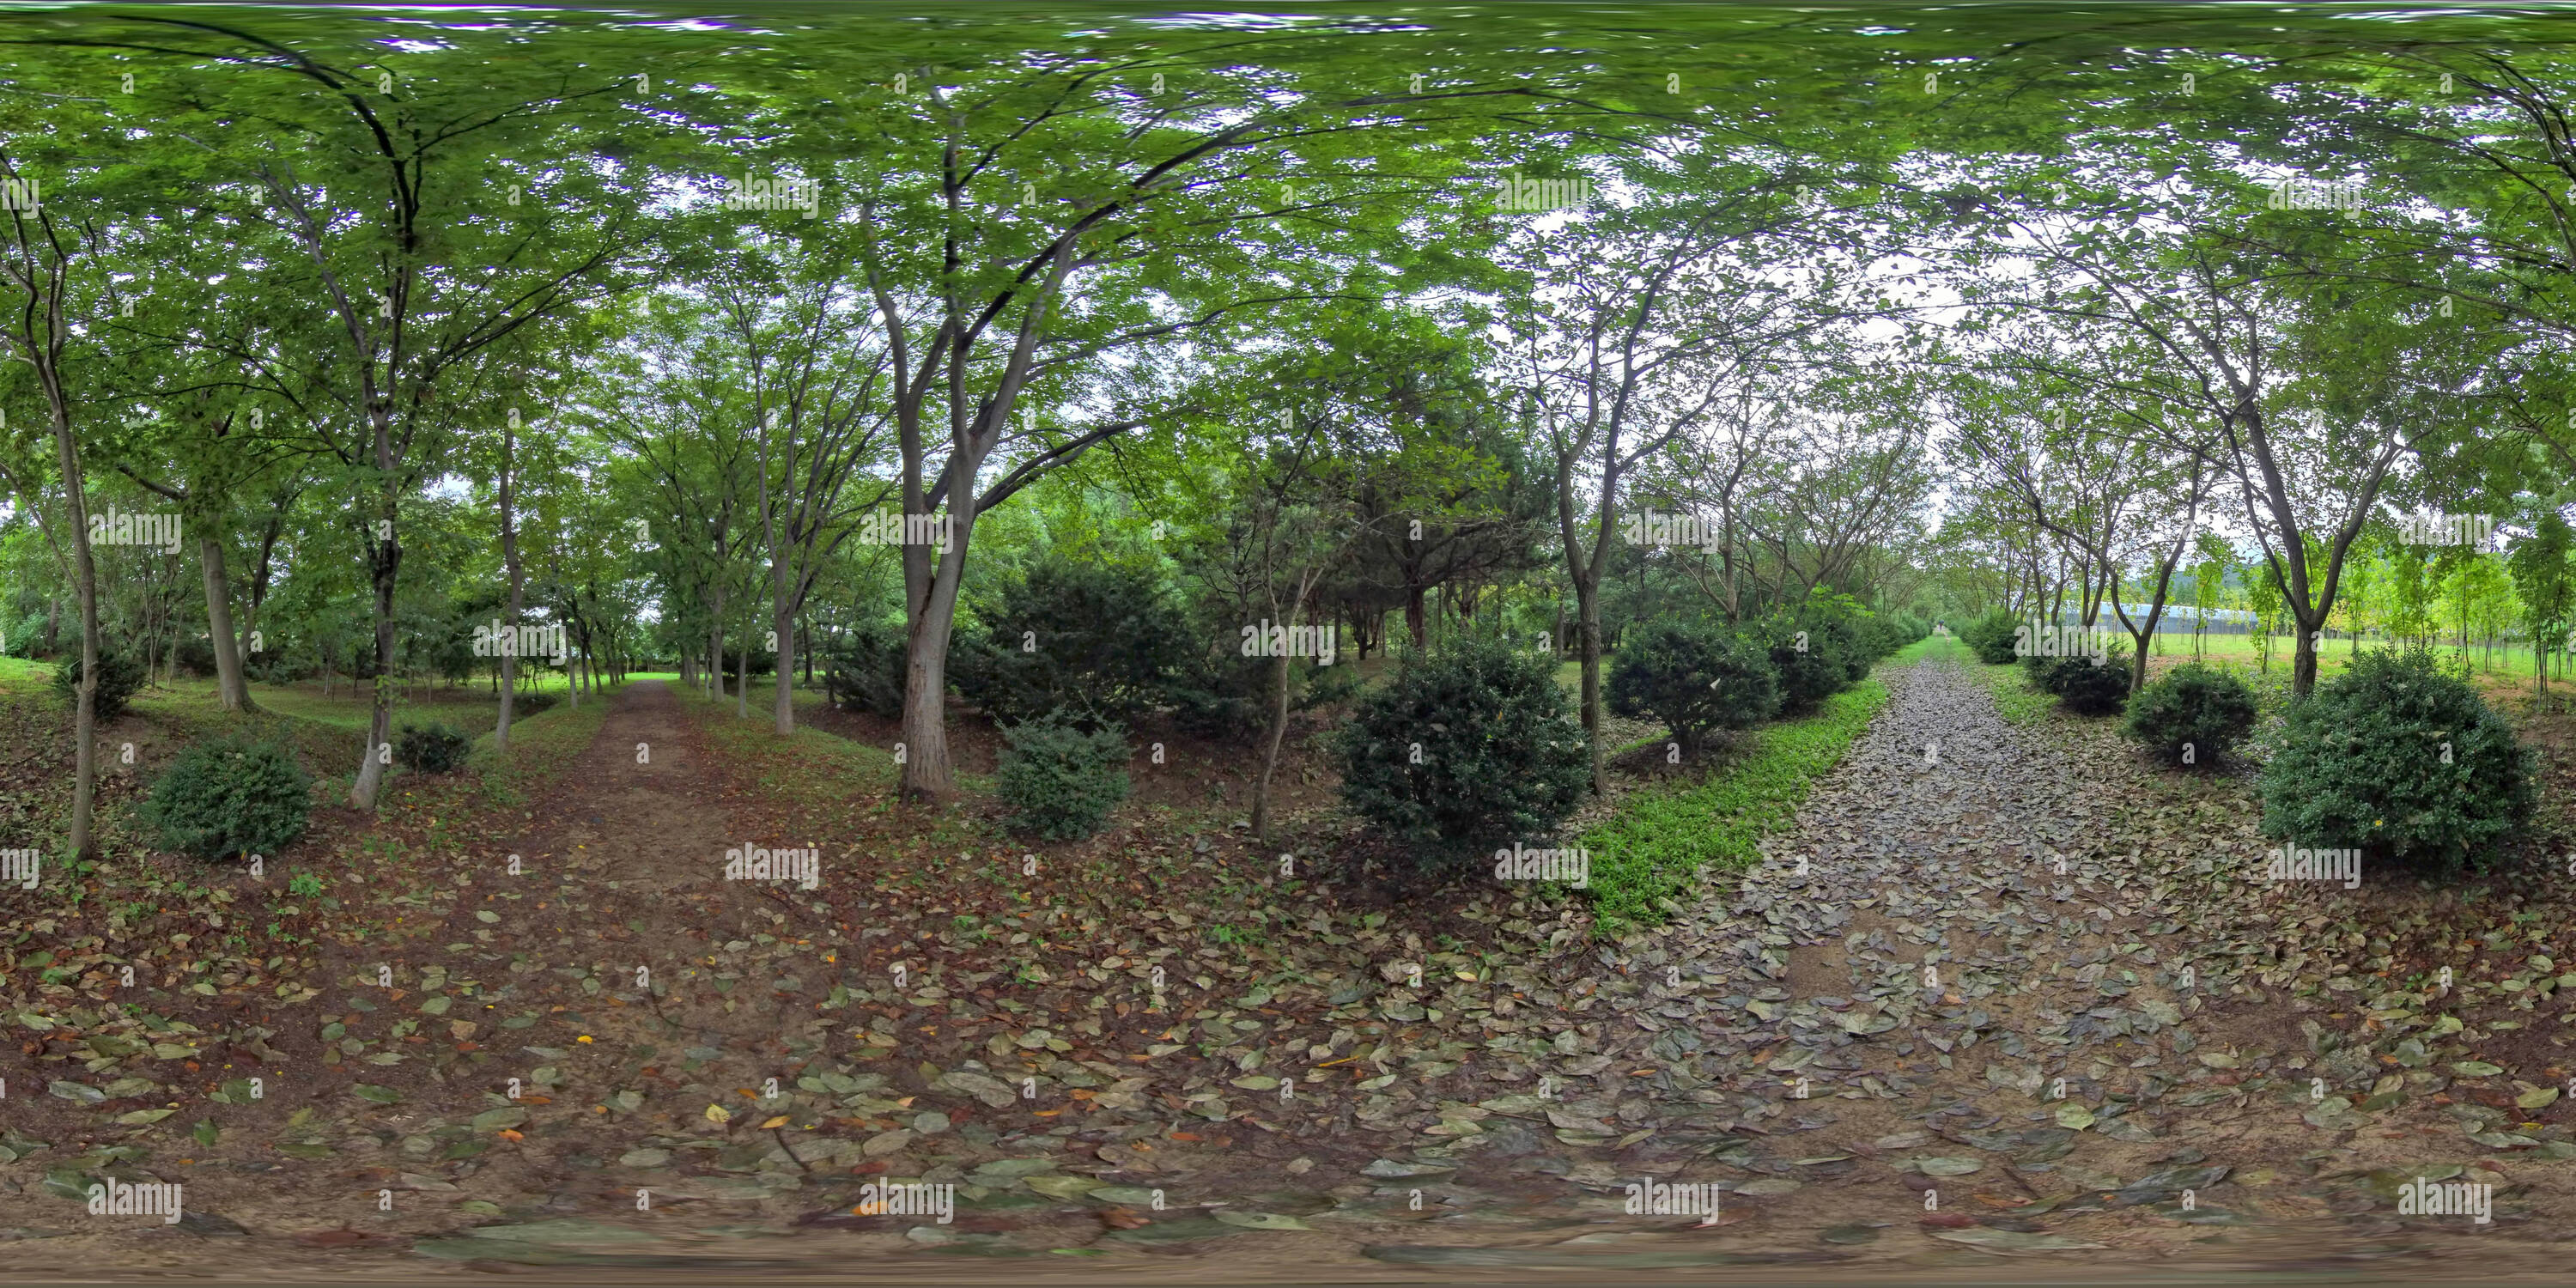 360 degree panoramic view of Gyeongju, South Korea 27 August 2019: 360VR Arboretum in Korea. Garden and Park. AR/VR content.